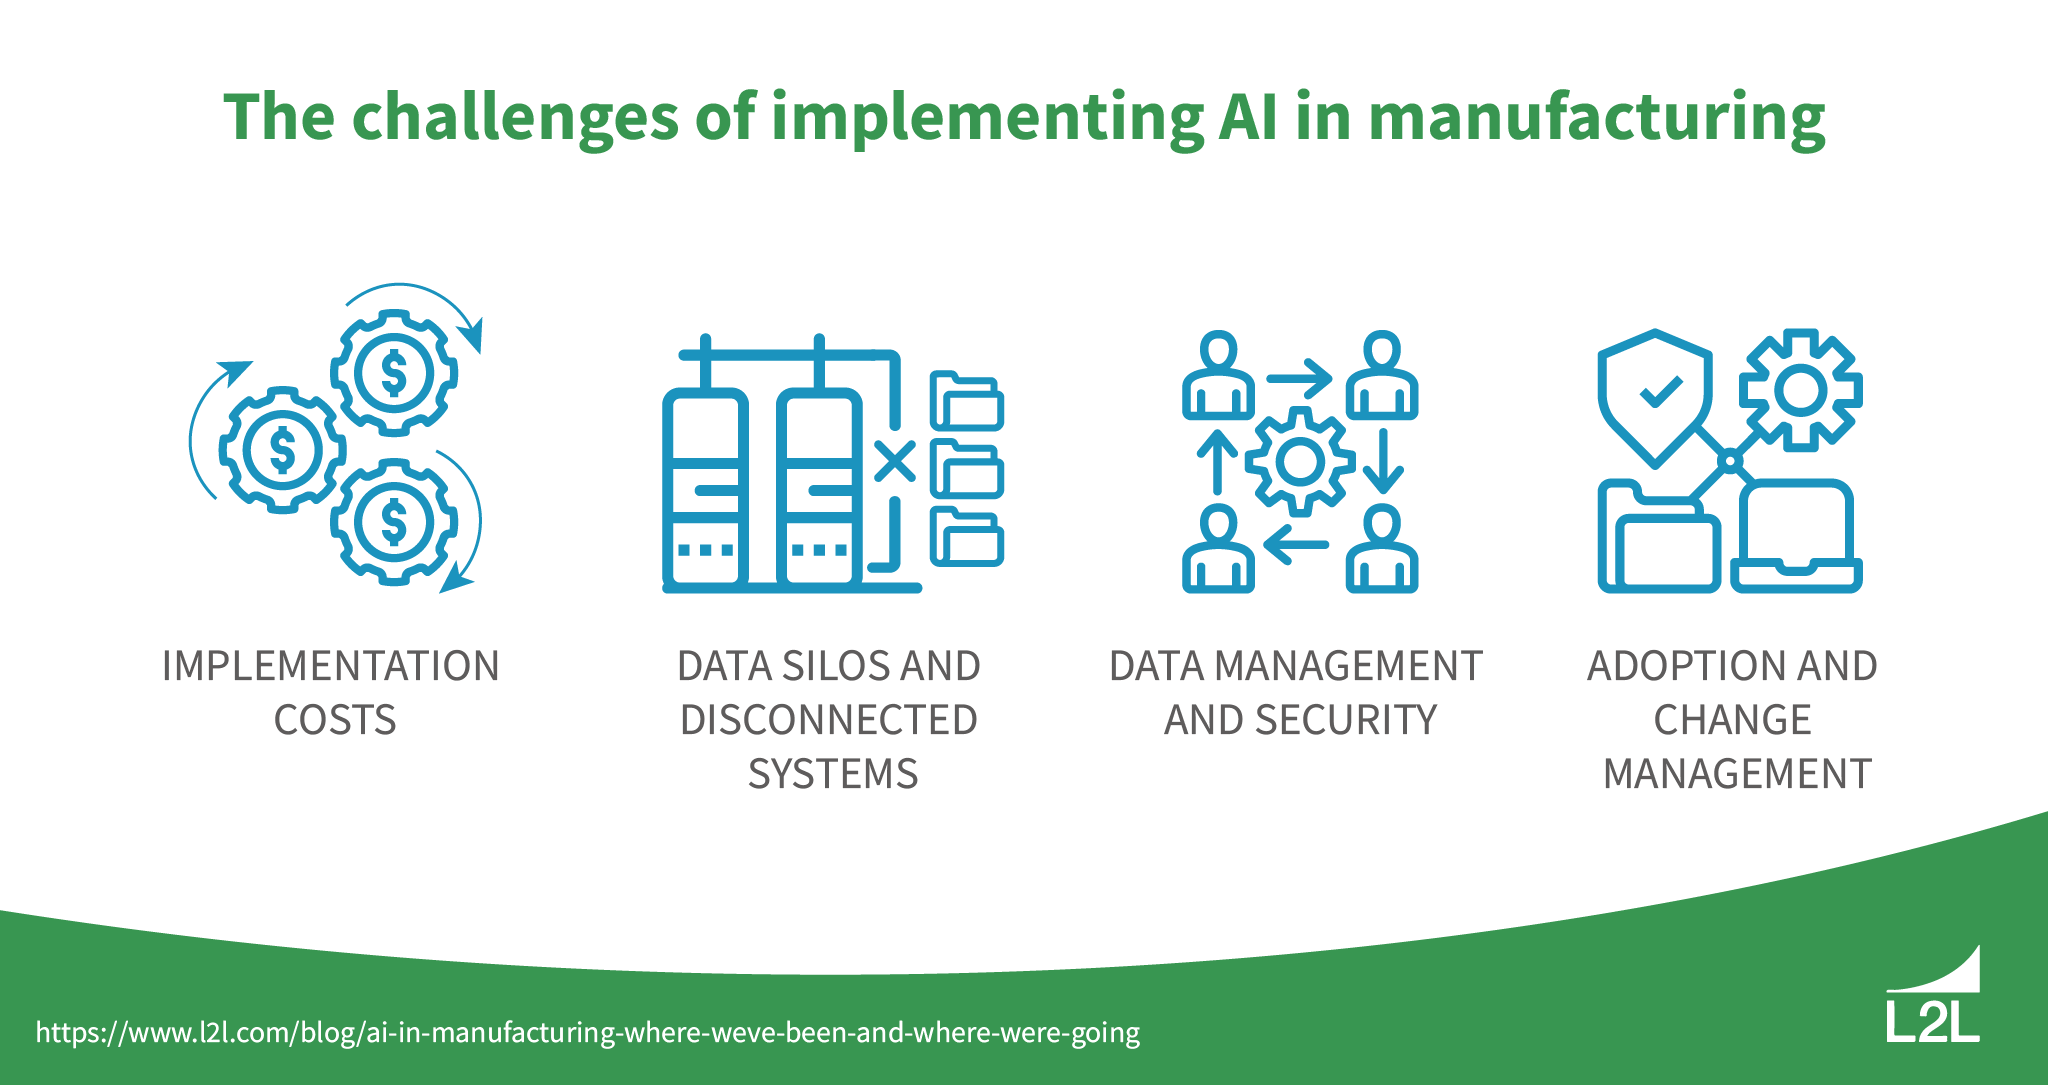 A list of the challenges of implementing AI in manufacturing.